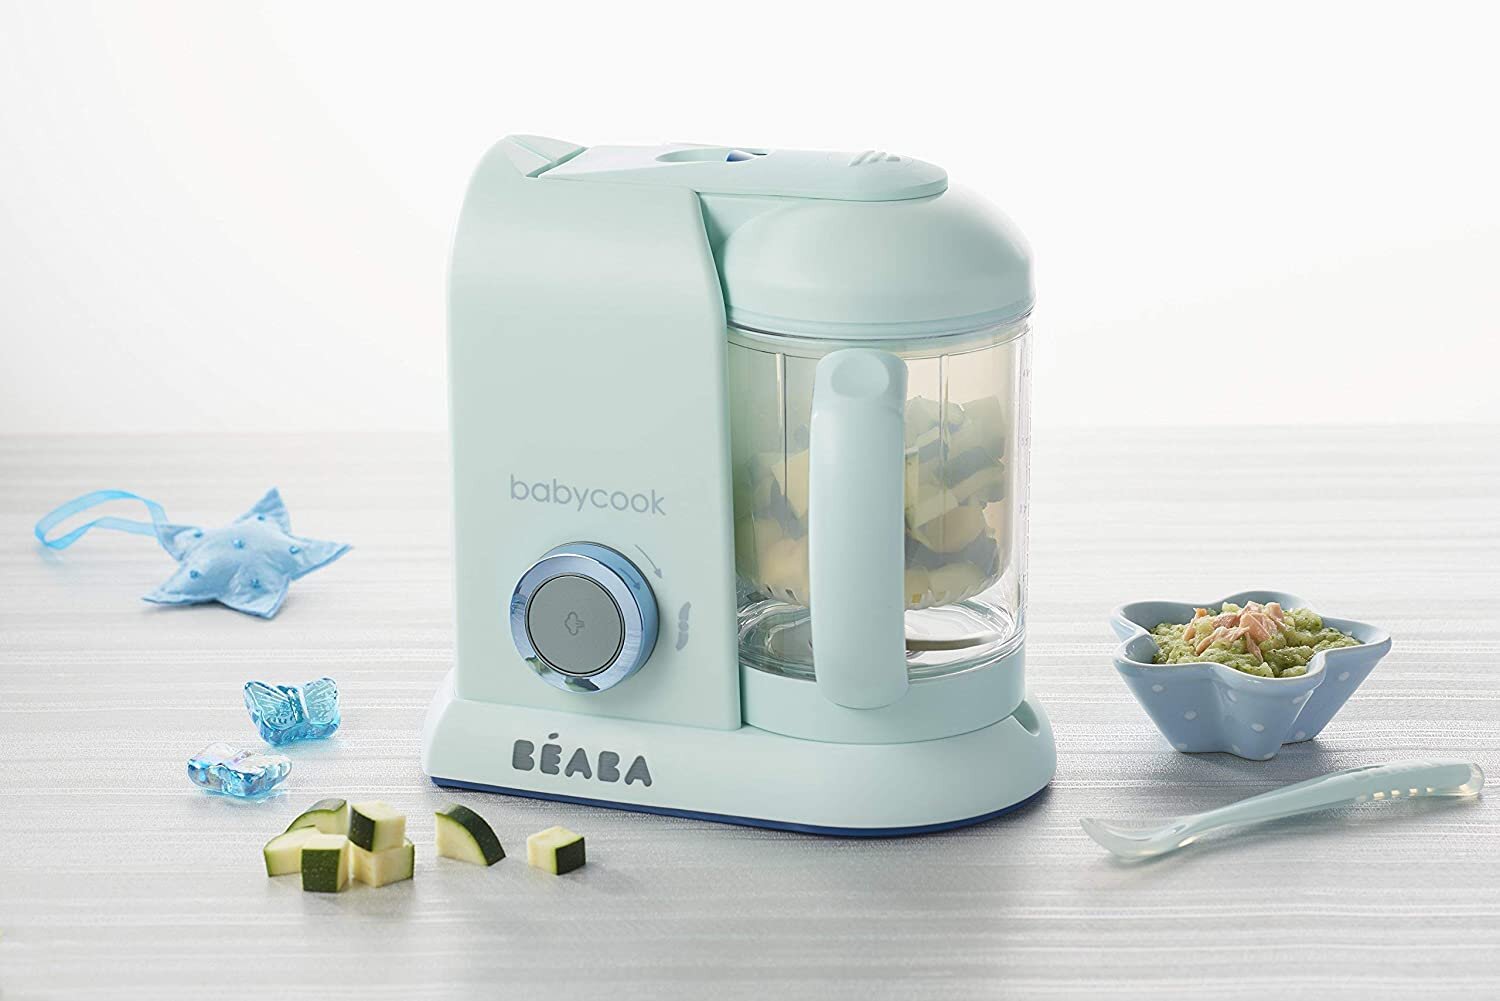 BEABA Babycook Macaron 4 in 1 Steam Cooker and Blender, 4.5 Cups